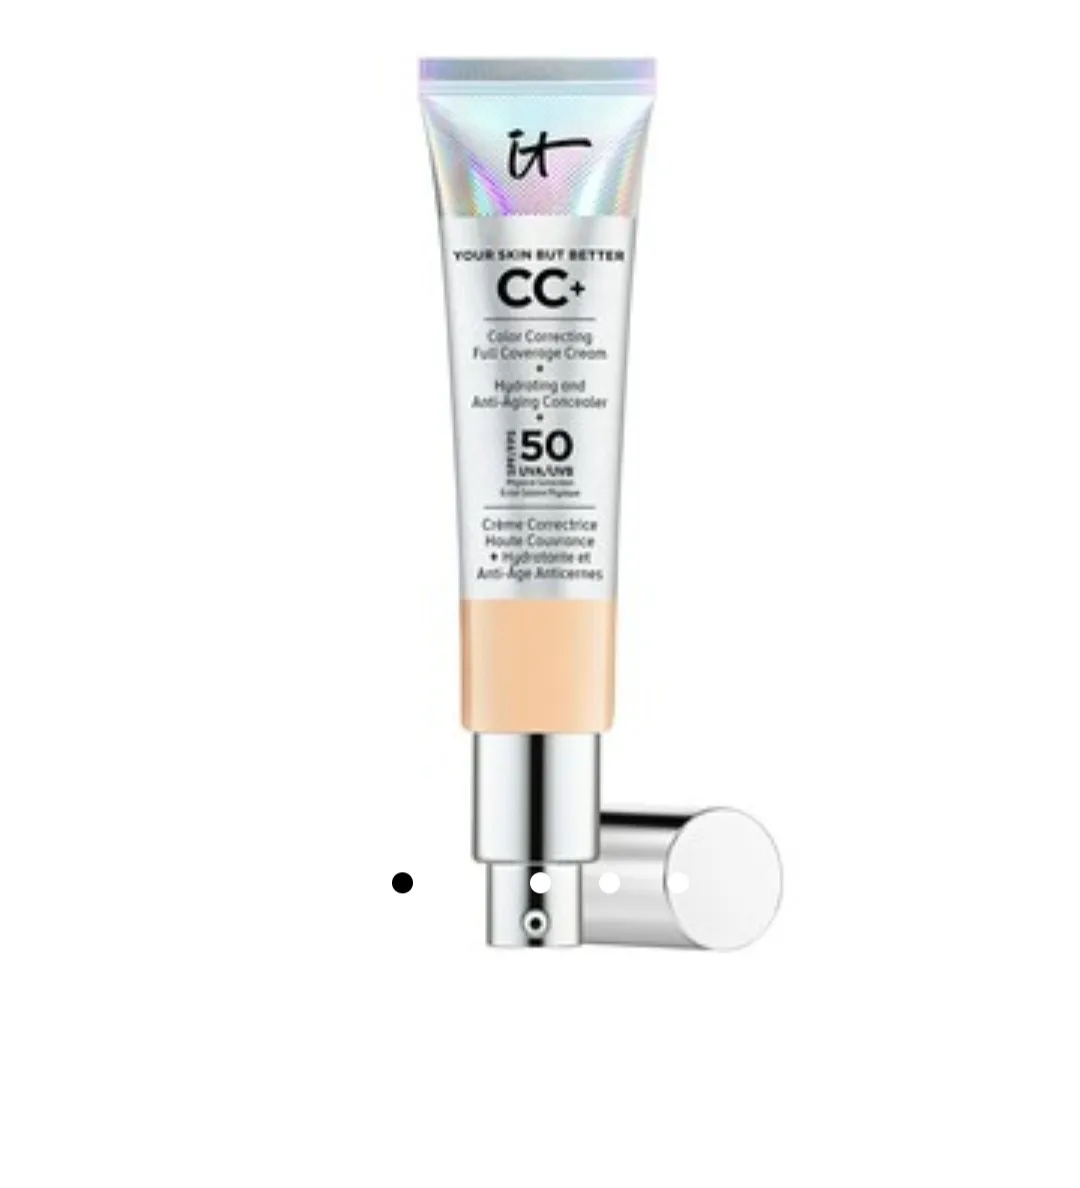 CC Cream It Cosmetics Your Skin But Better Claro Spf 50 32 ml - review image